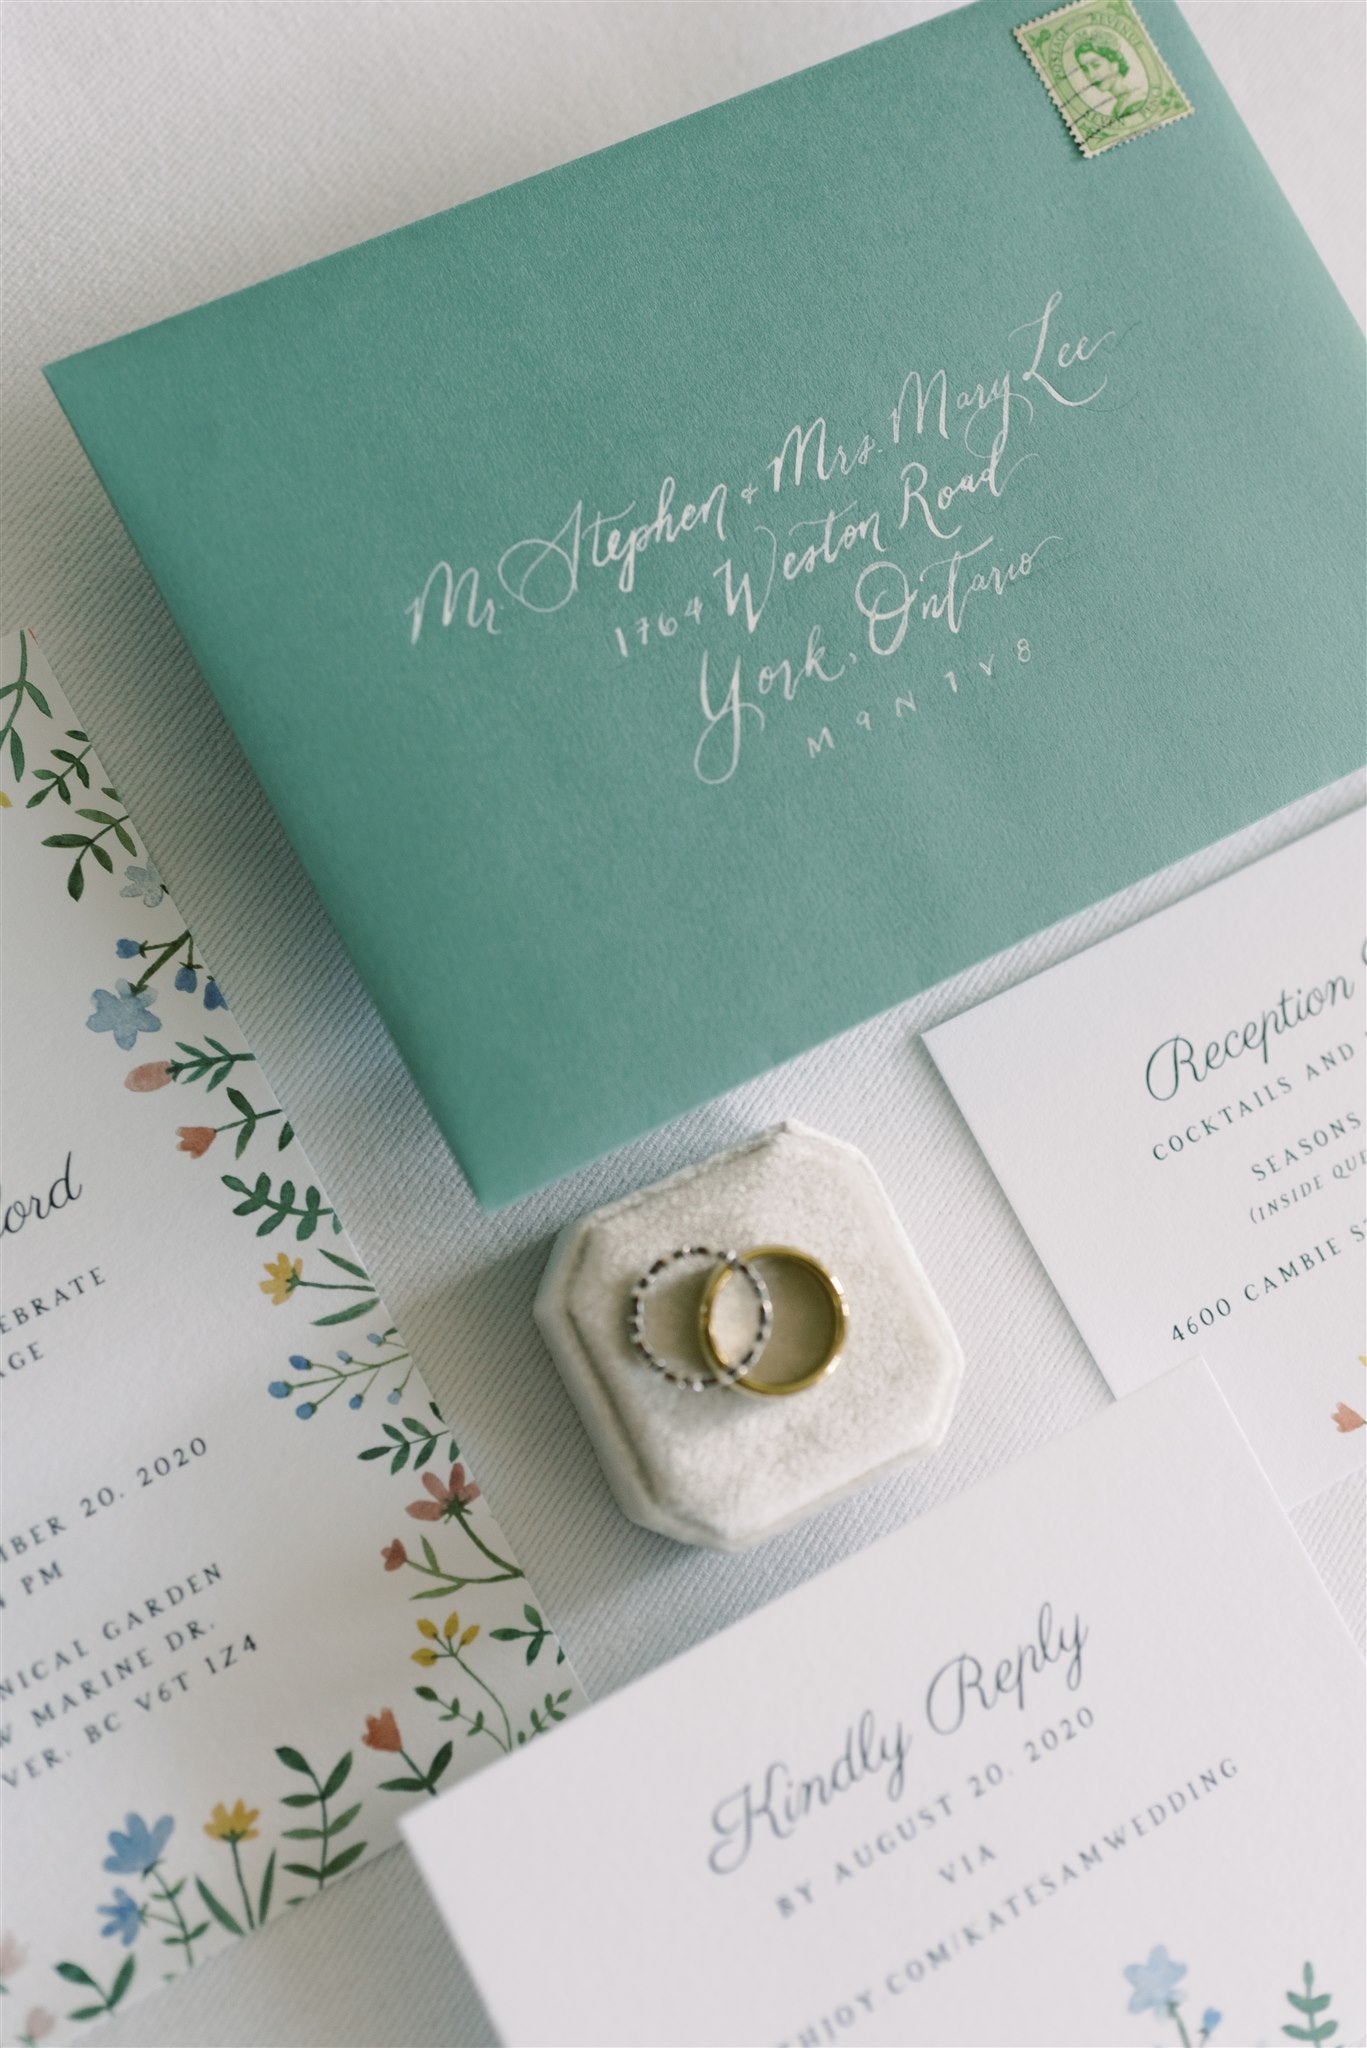 Wildflower emerald green wedding invitations and calligraphy by Papelu Studio from Vancouver, British Columbia. Photo by Vivian Wong Photography.